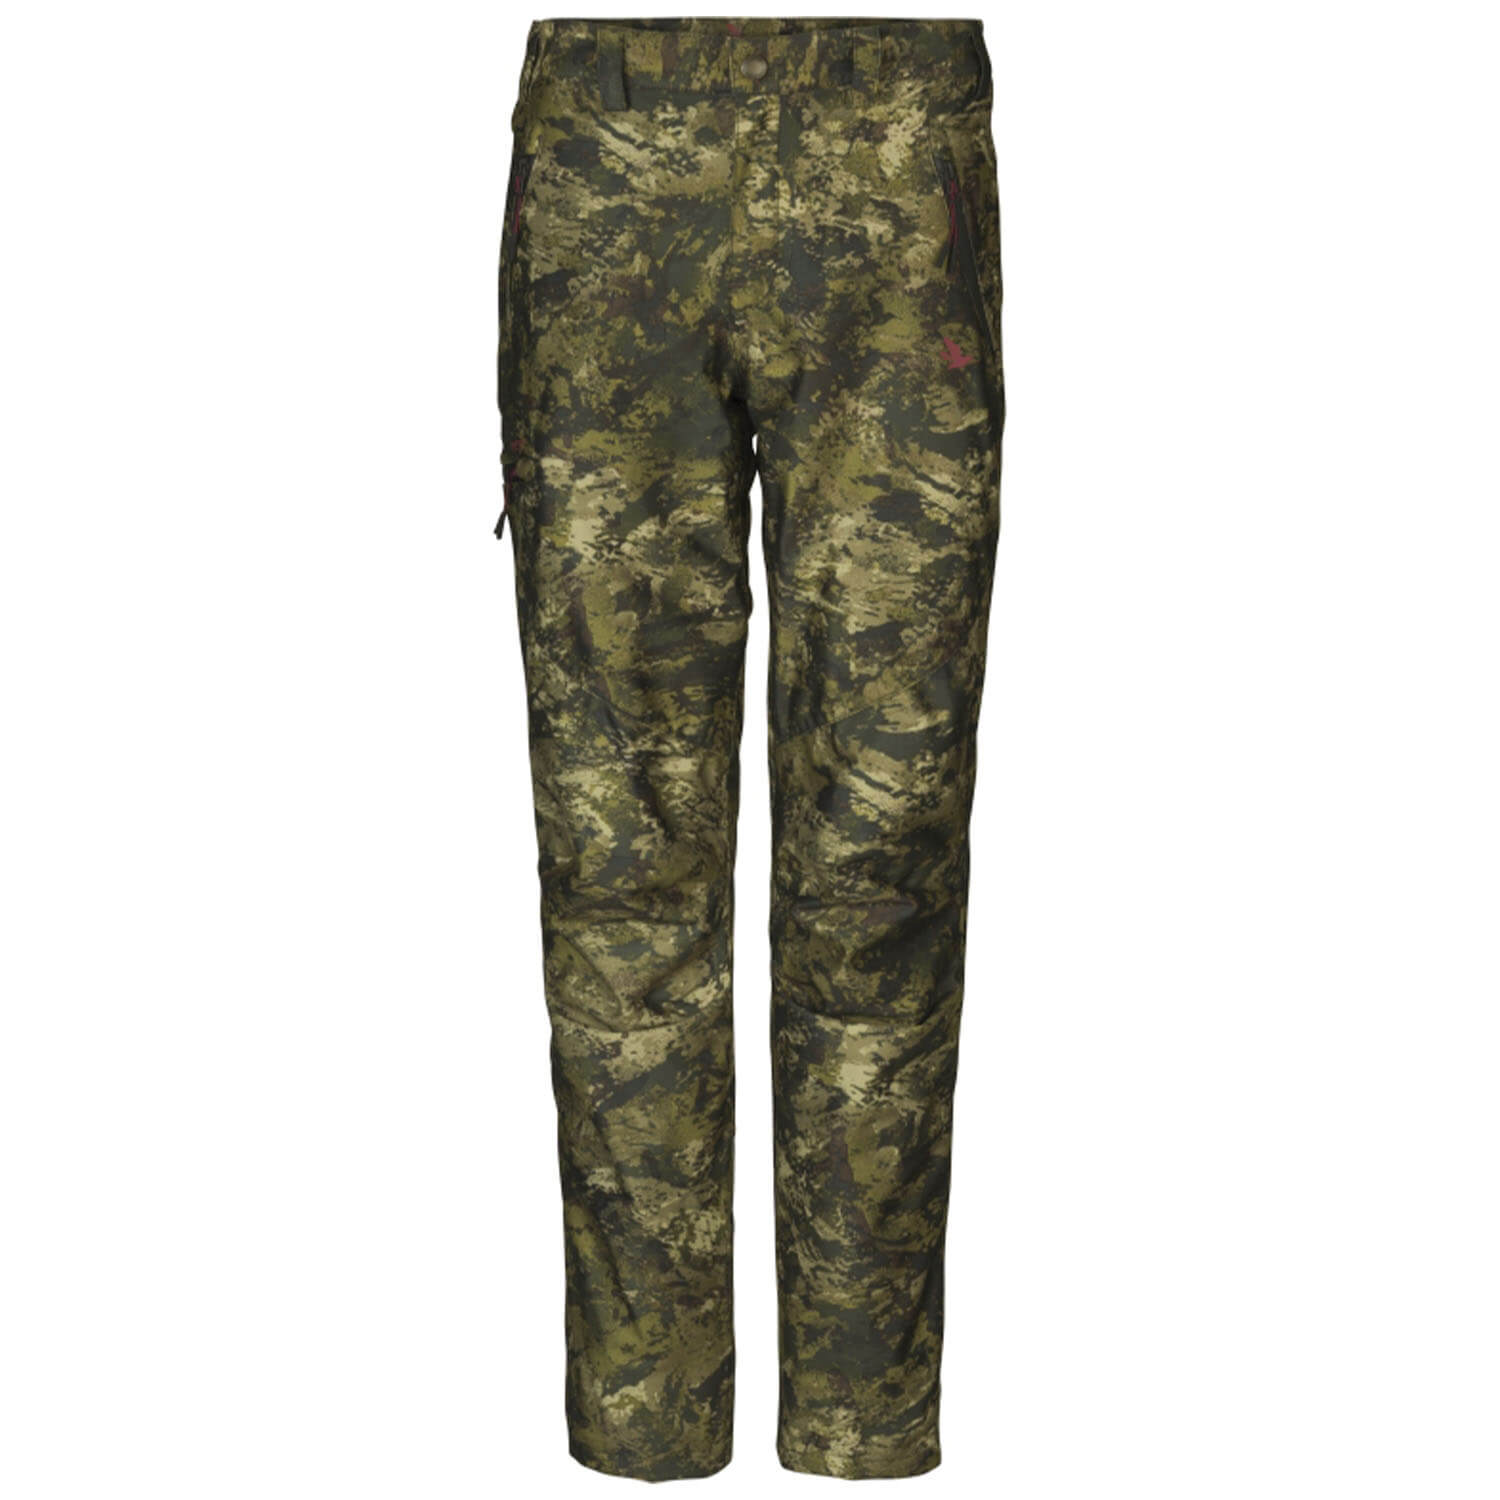 Seeland ladys hunting pants avail (InVis) - Hunting Trousers